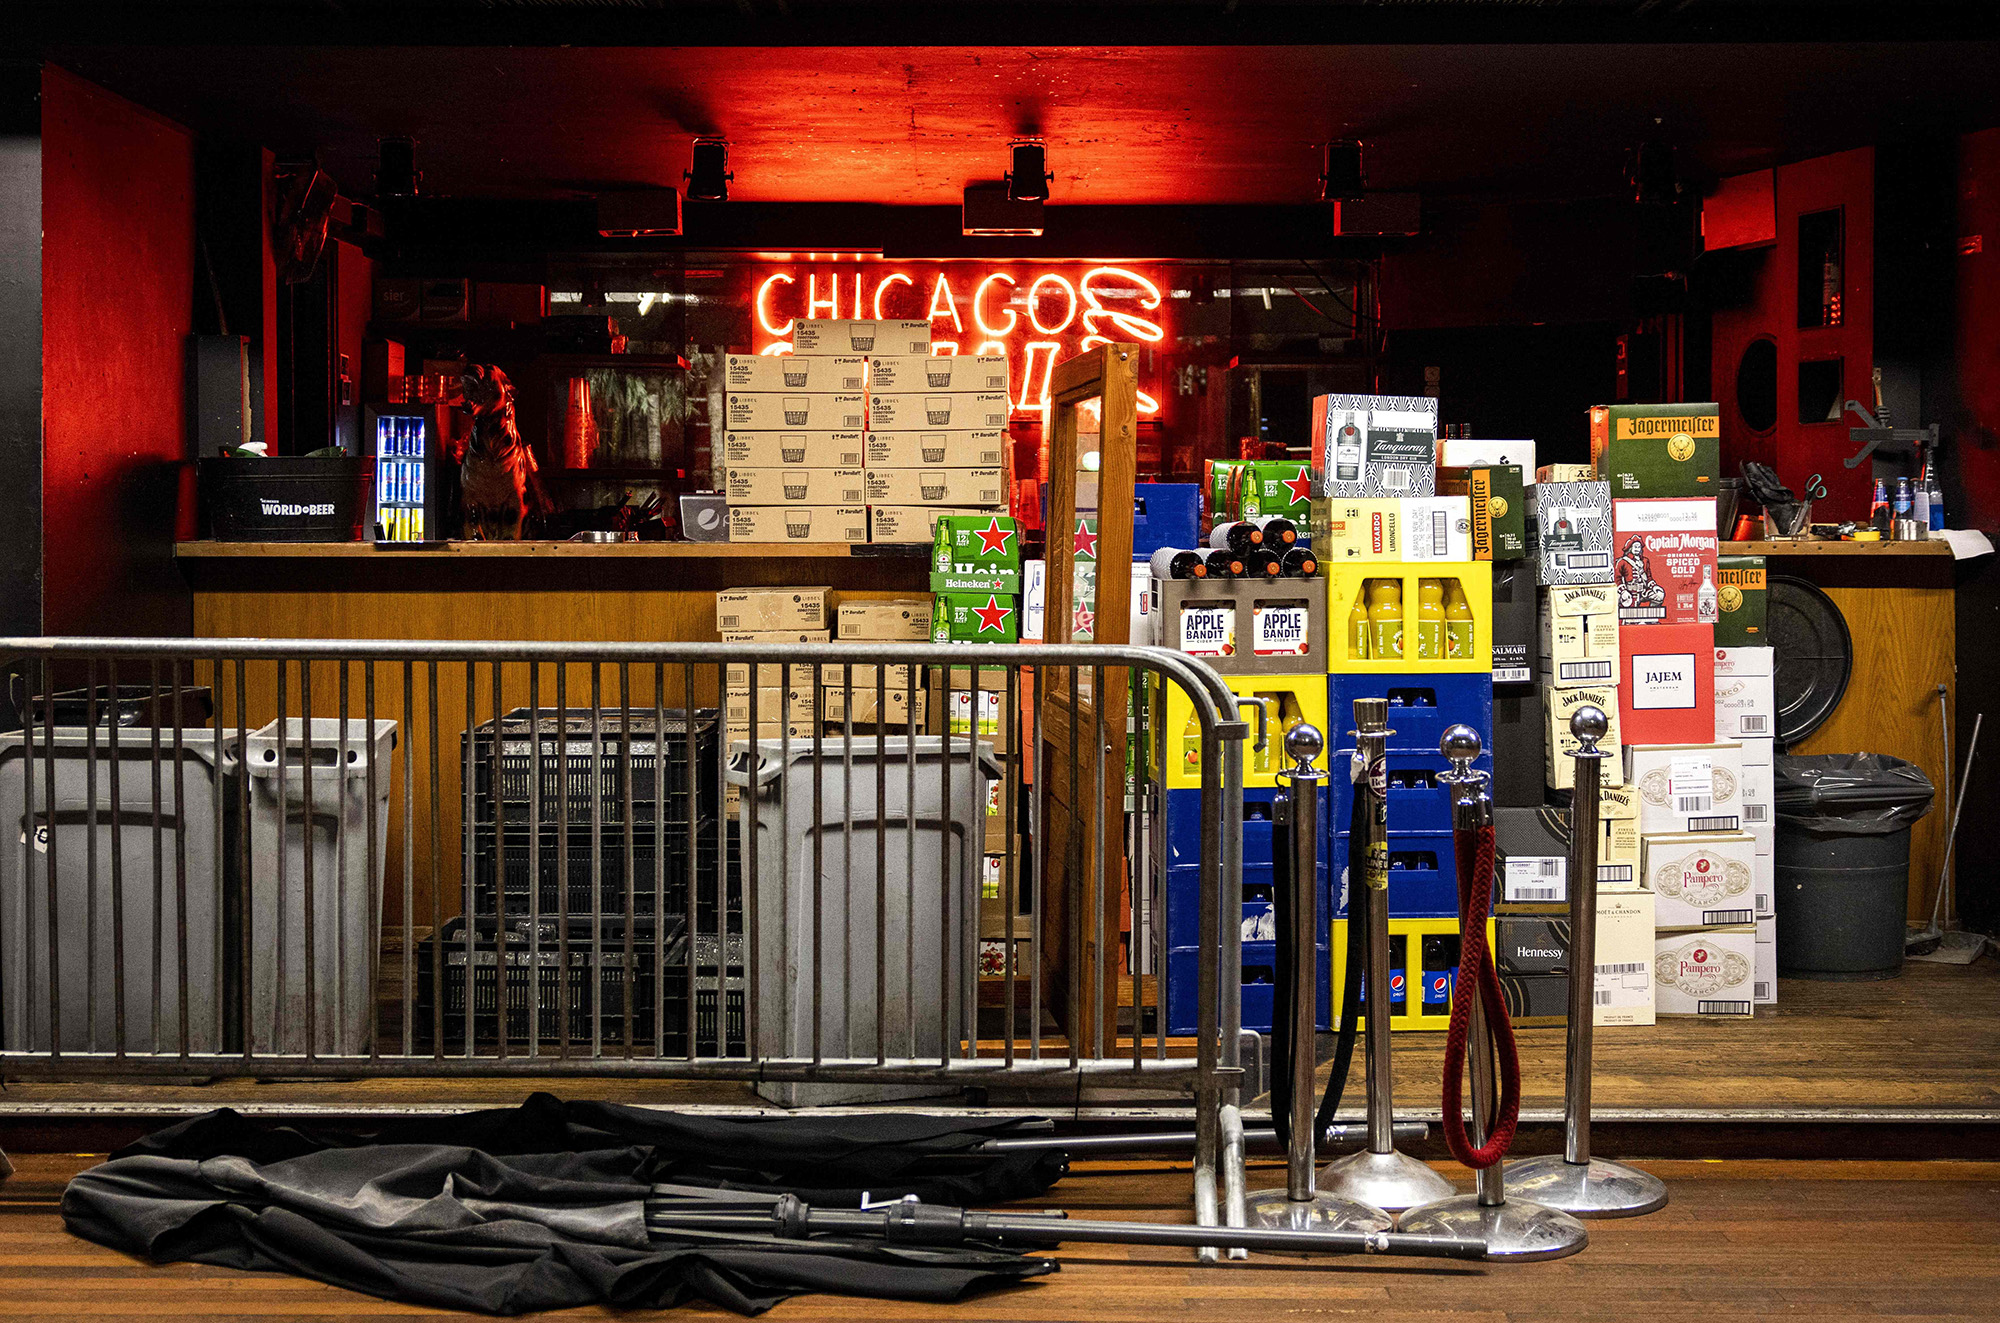 An etiquette guide to Chicago nightlife